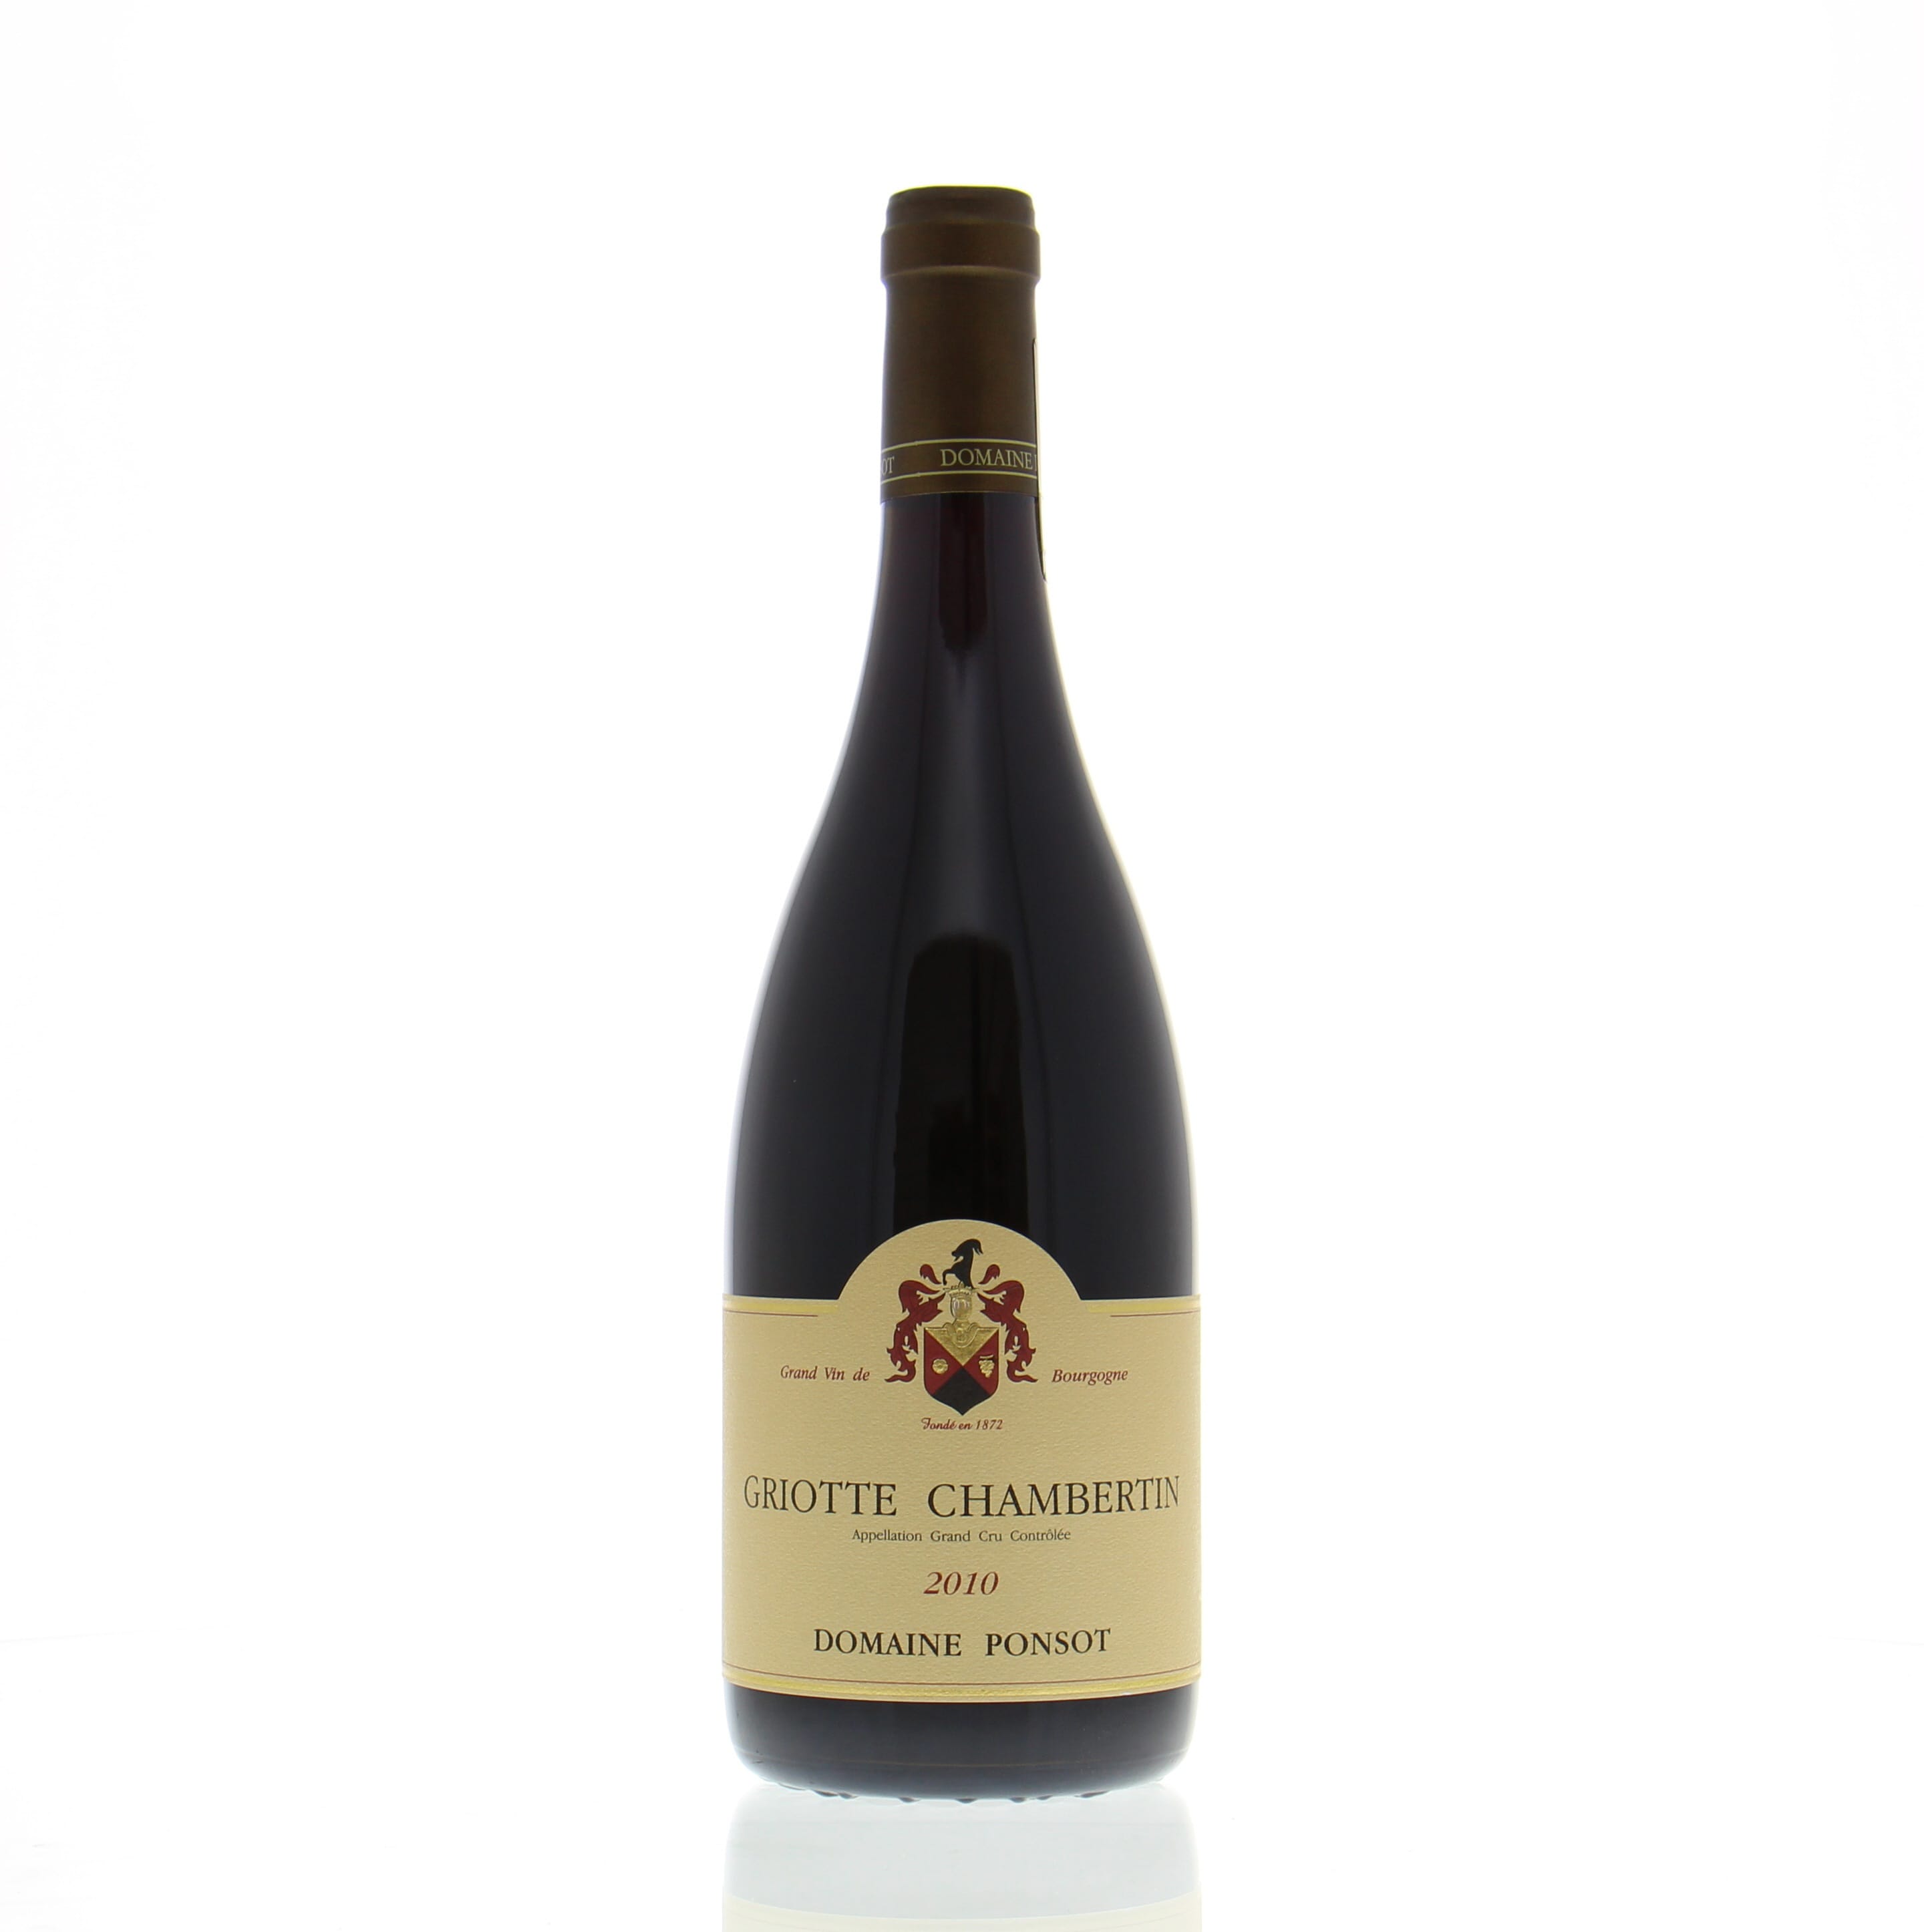 Domaine Ponsot - Griottes Chambertin 2010